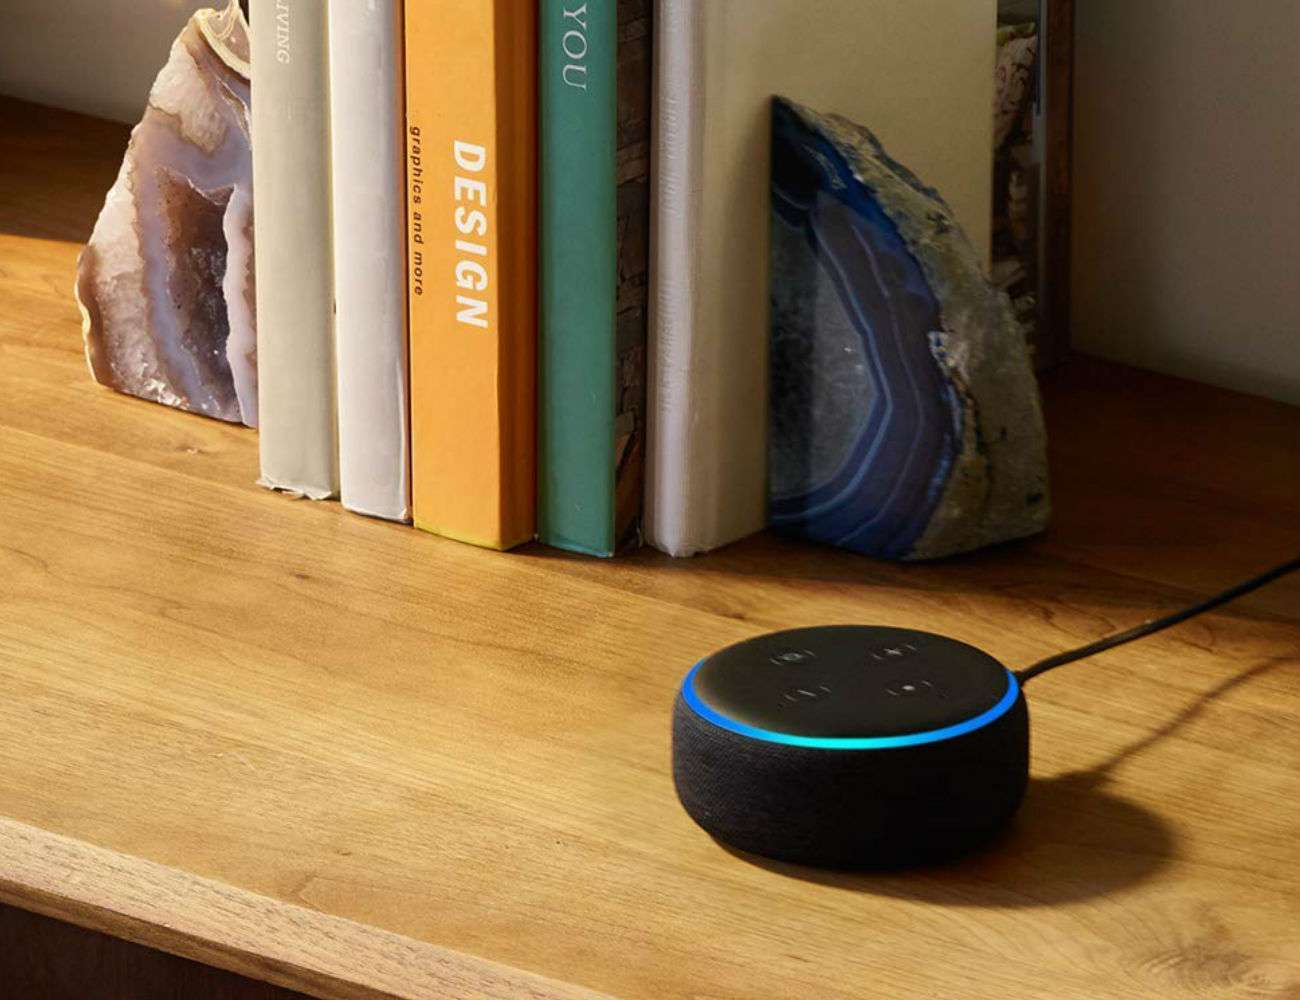 Amazon Echo Dot (3rd Gen) Smart Speaker gives you full access to the smart assistant